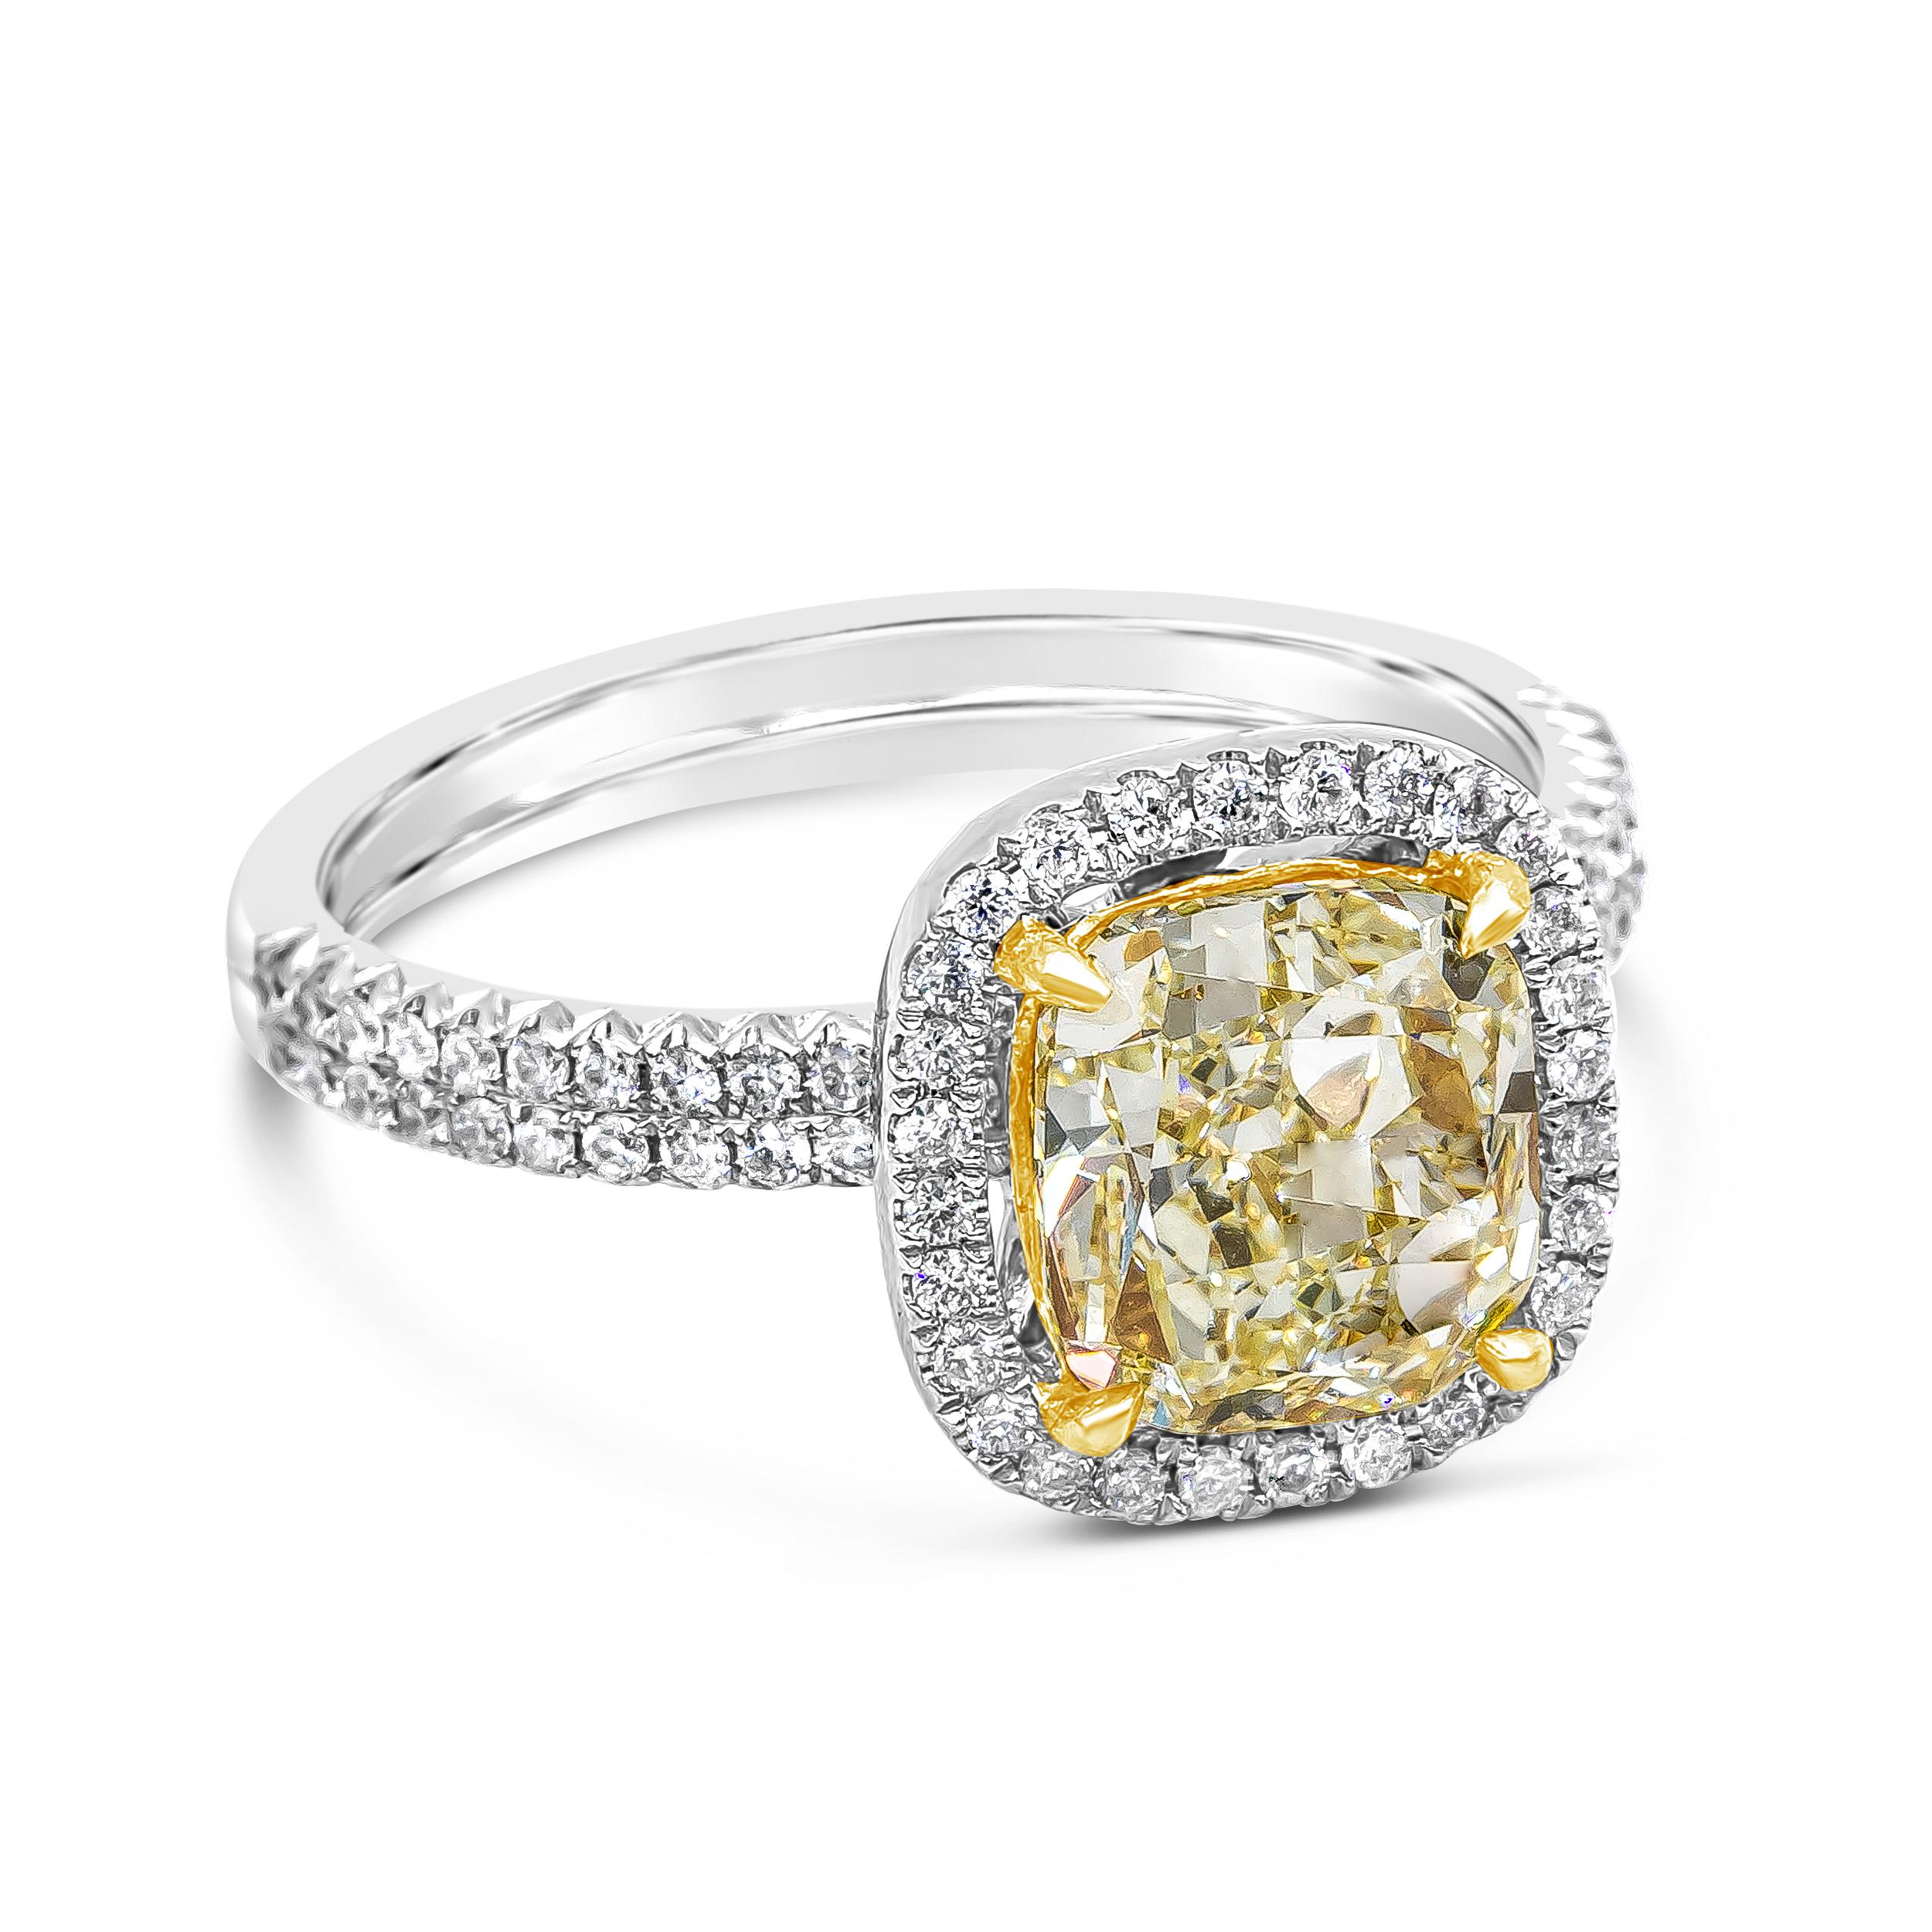 Showcasing a 2.03 carats cushion cut yellow diamond center, set in a floating halo of round brilliant diamonds, four prong made in 18K yellow gold. Shank is double-row diamond encrusted in half eternity setting. Made in 18 karat white gold. Accent